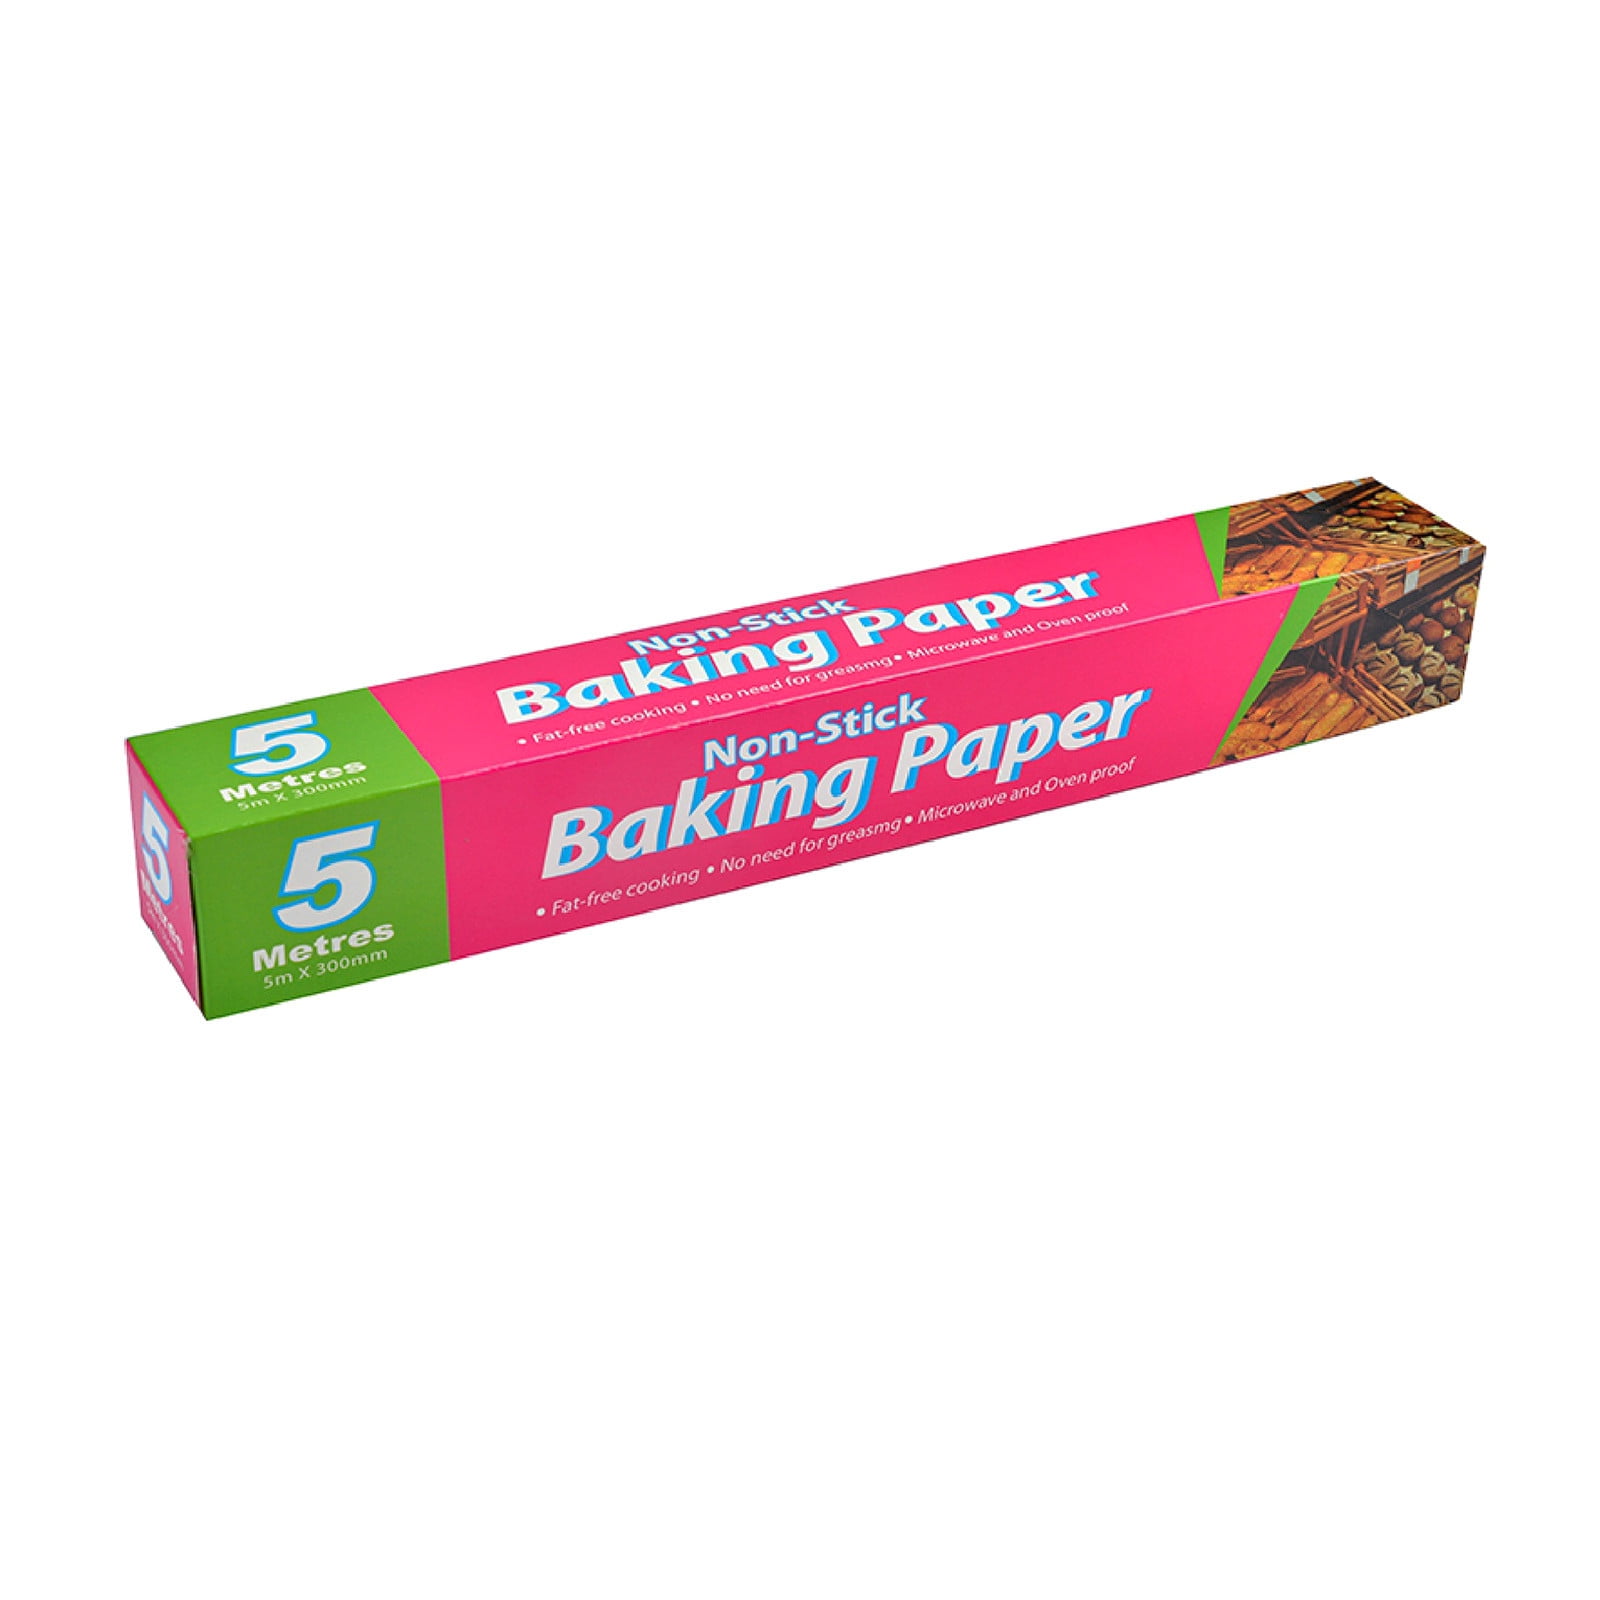 Parchment Paper Roll 12 x 50 Ft - Blue Sky Trading